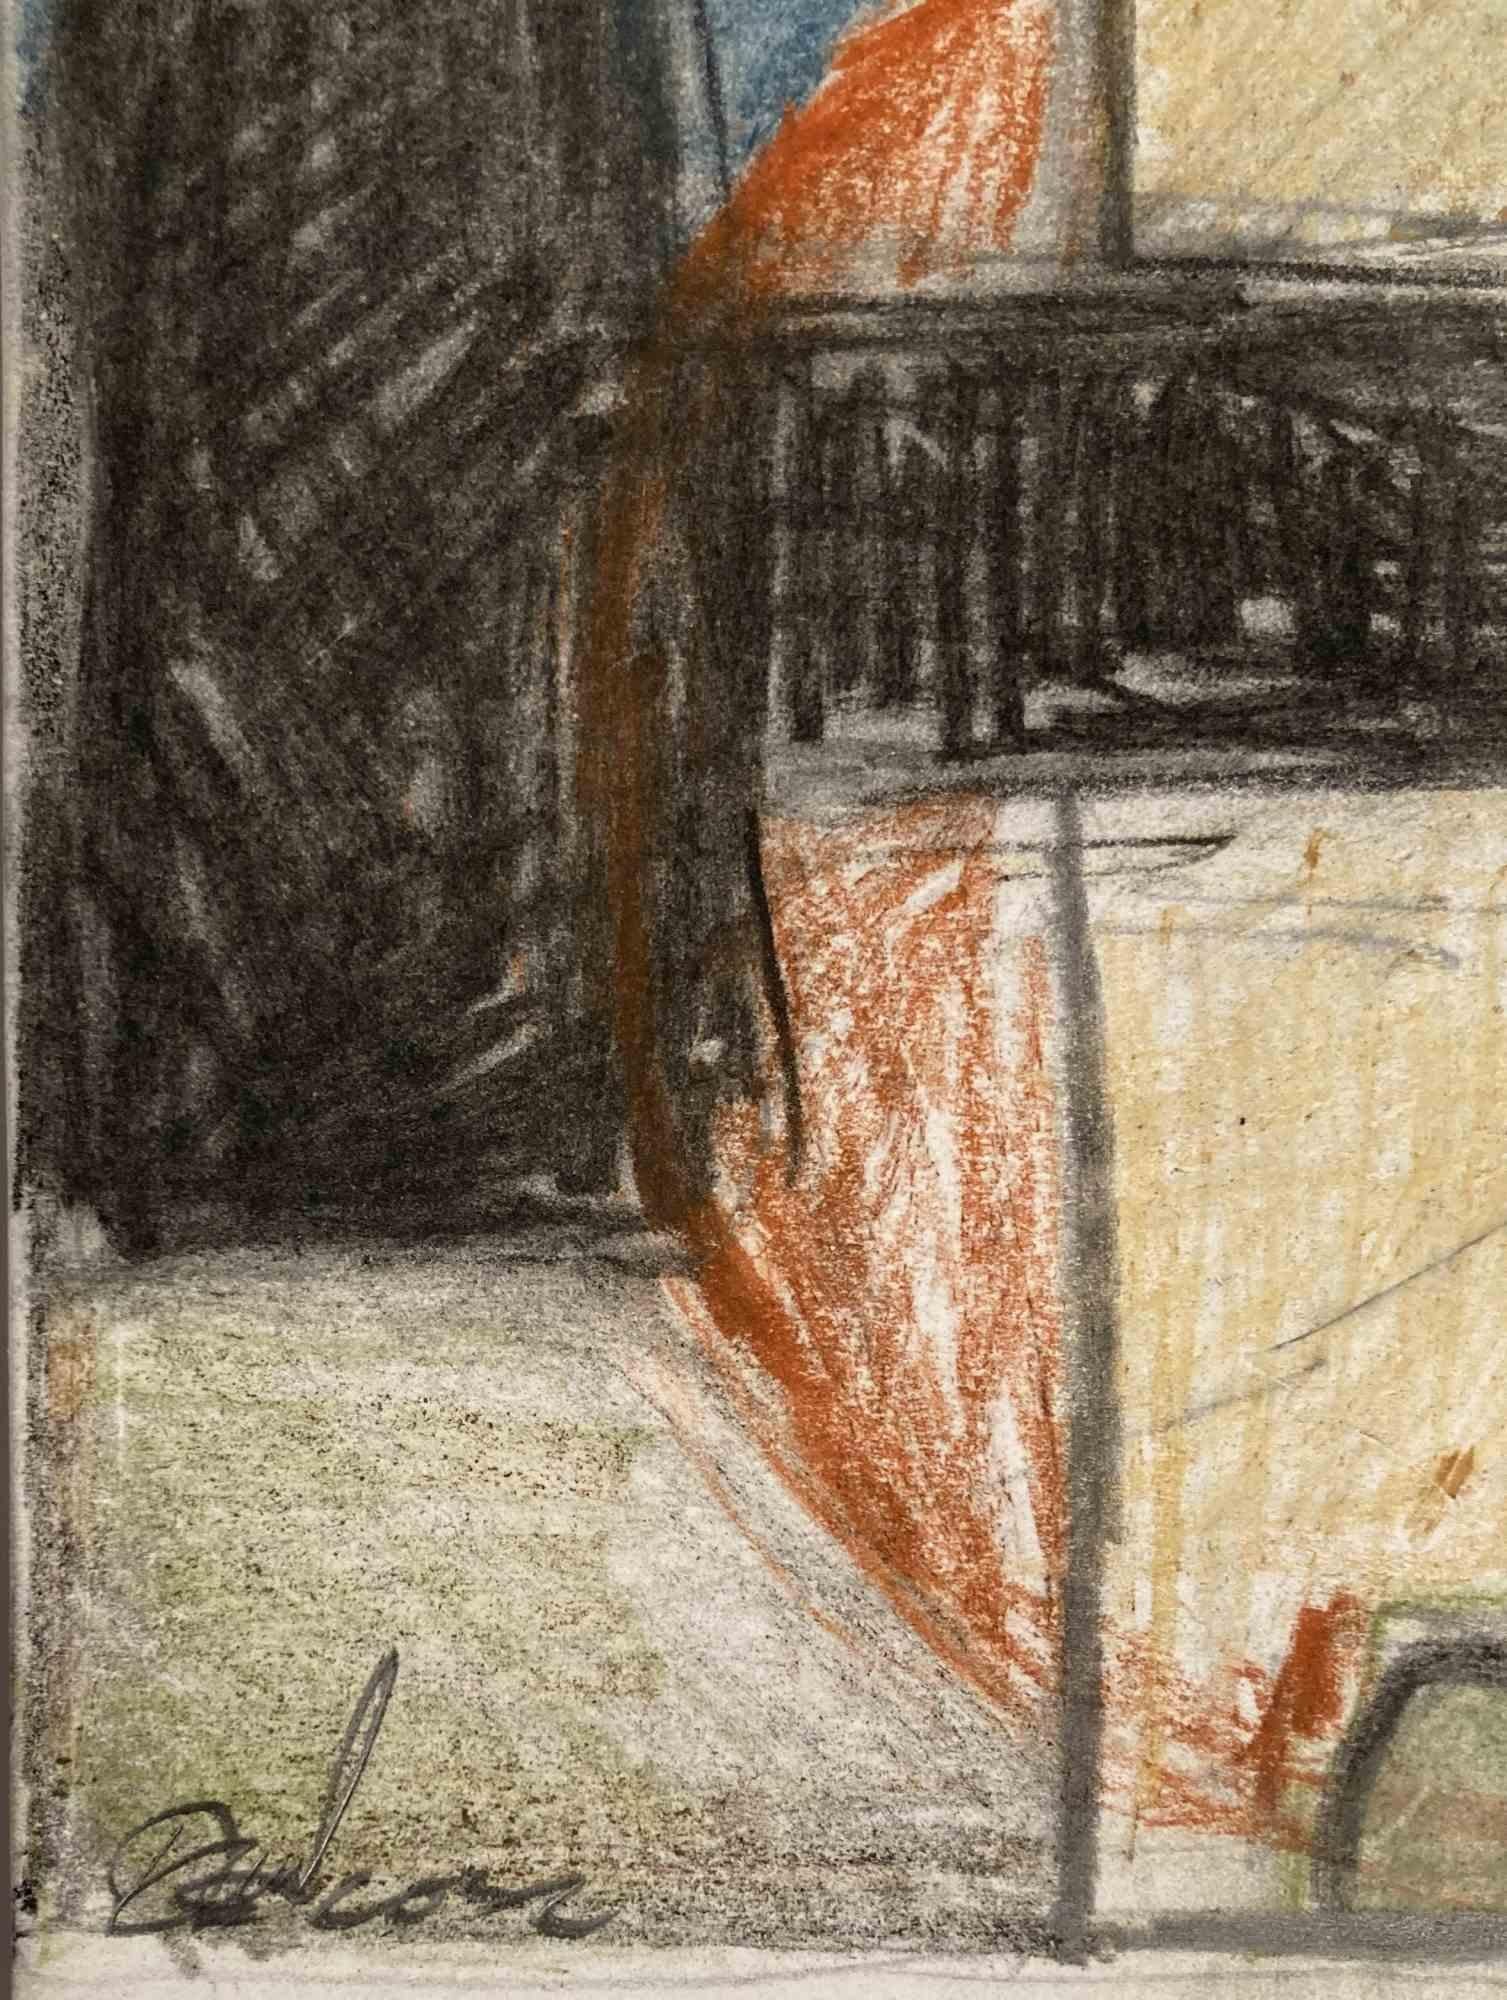 Charcoal and pastel drawing realized in 2022. 
Here, in the background two head profiles are facing each other in sepia outline on a blue, gray, and yellow abstract surface. In the foreground, a weave of two green silhouette-like figures placed